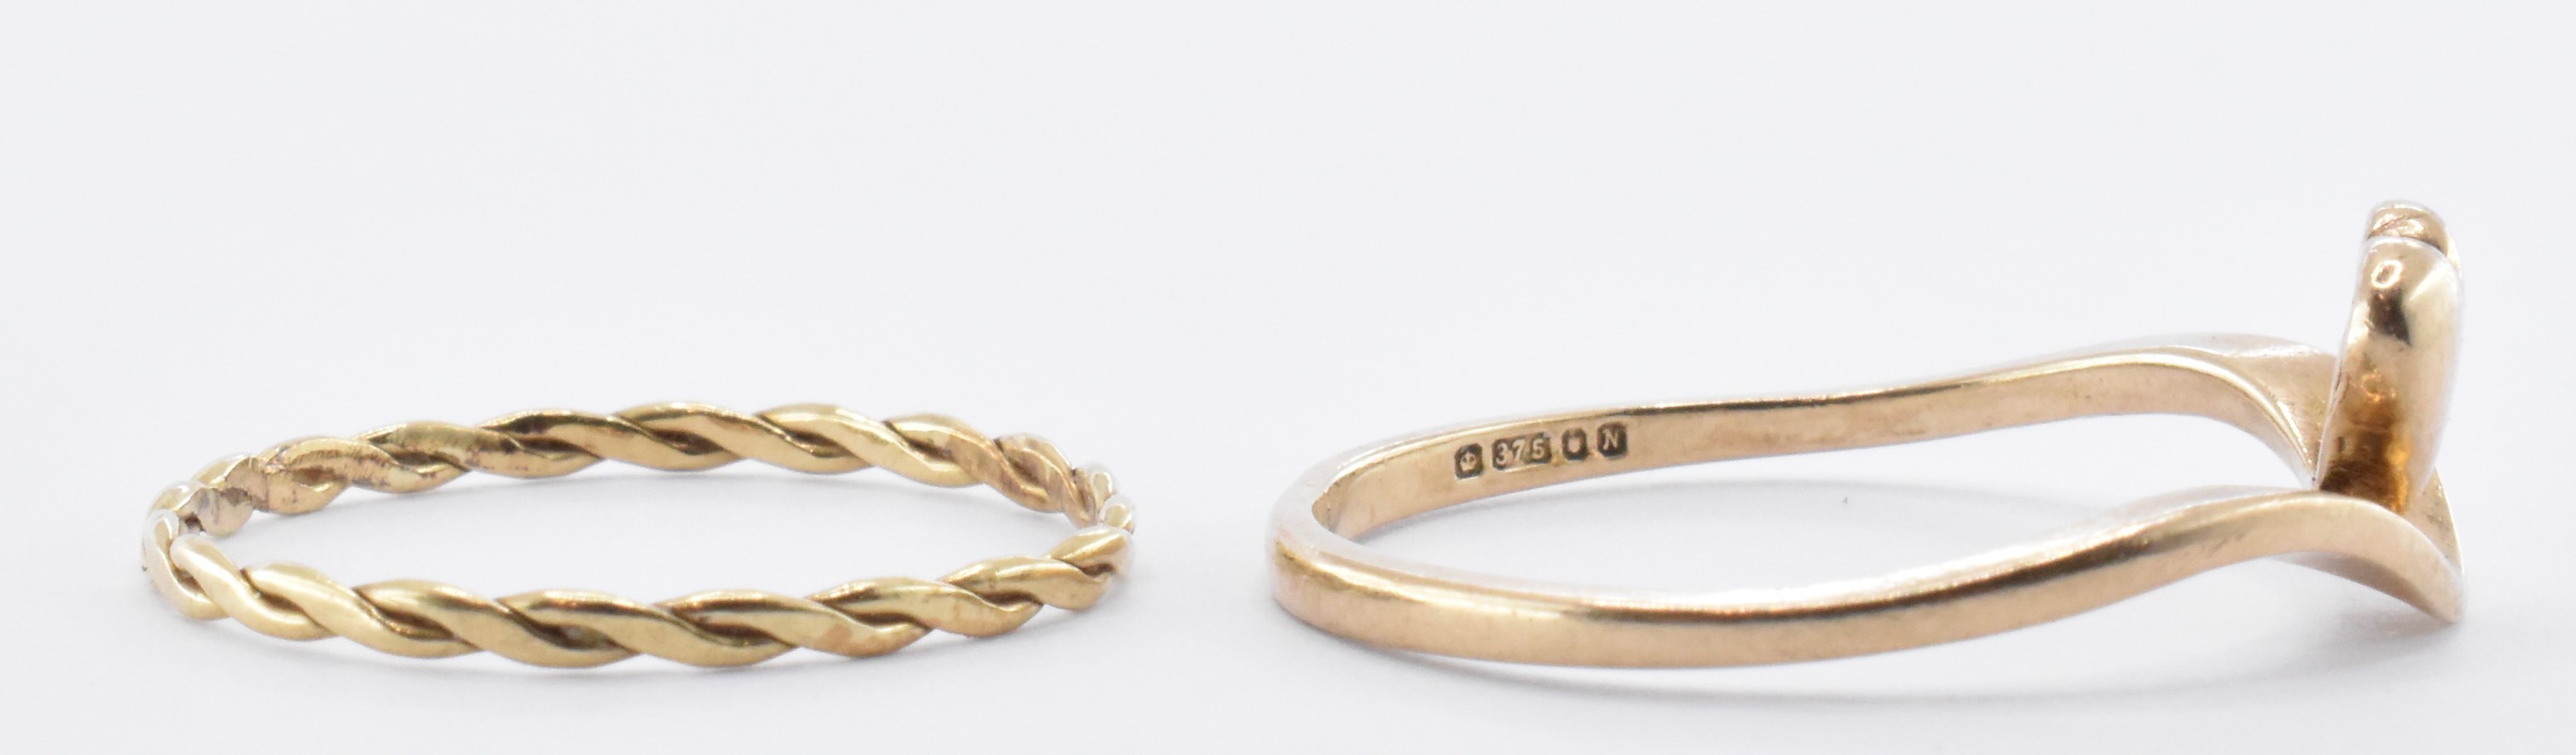 9CT GOLD HEART RING & 14CT GOLD ROPE TWIST RING - Image 5 of 7